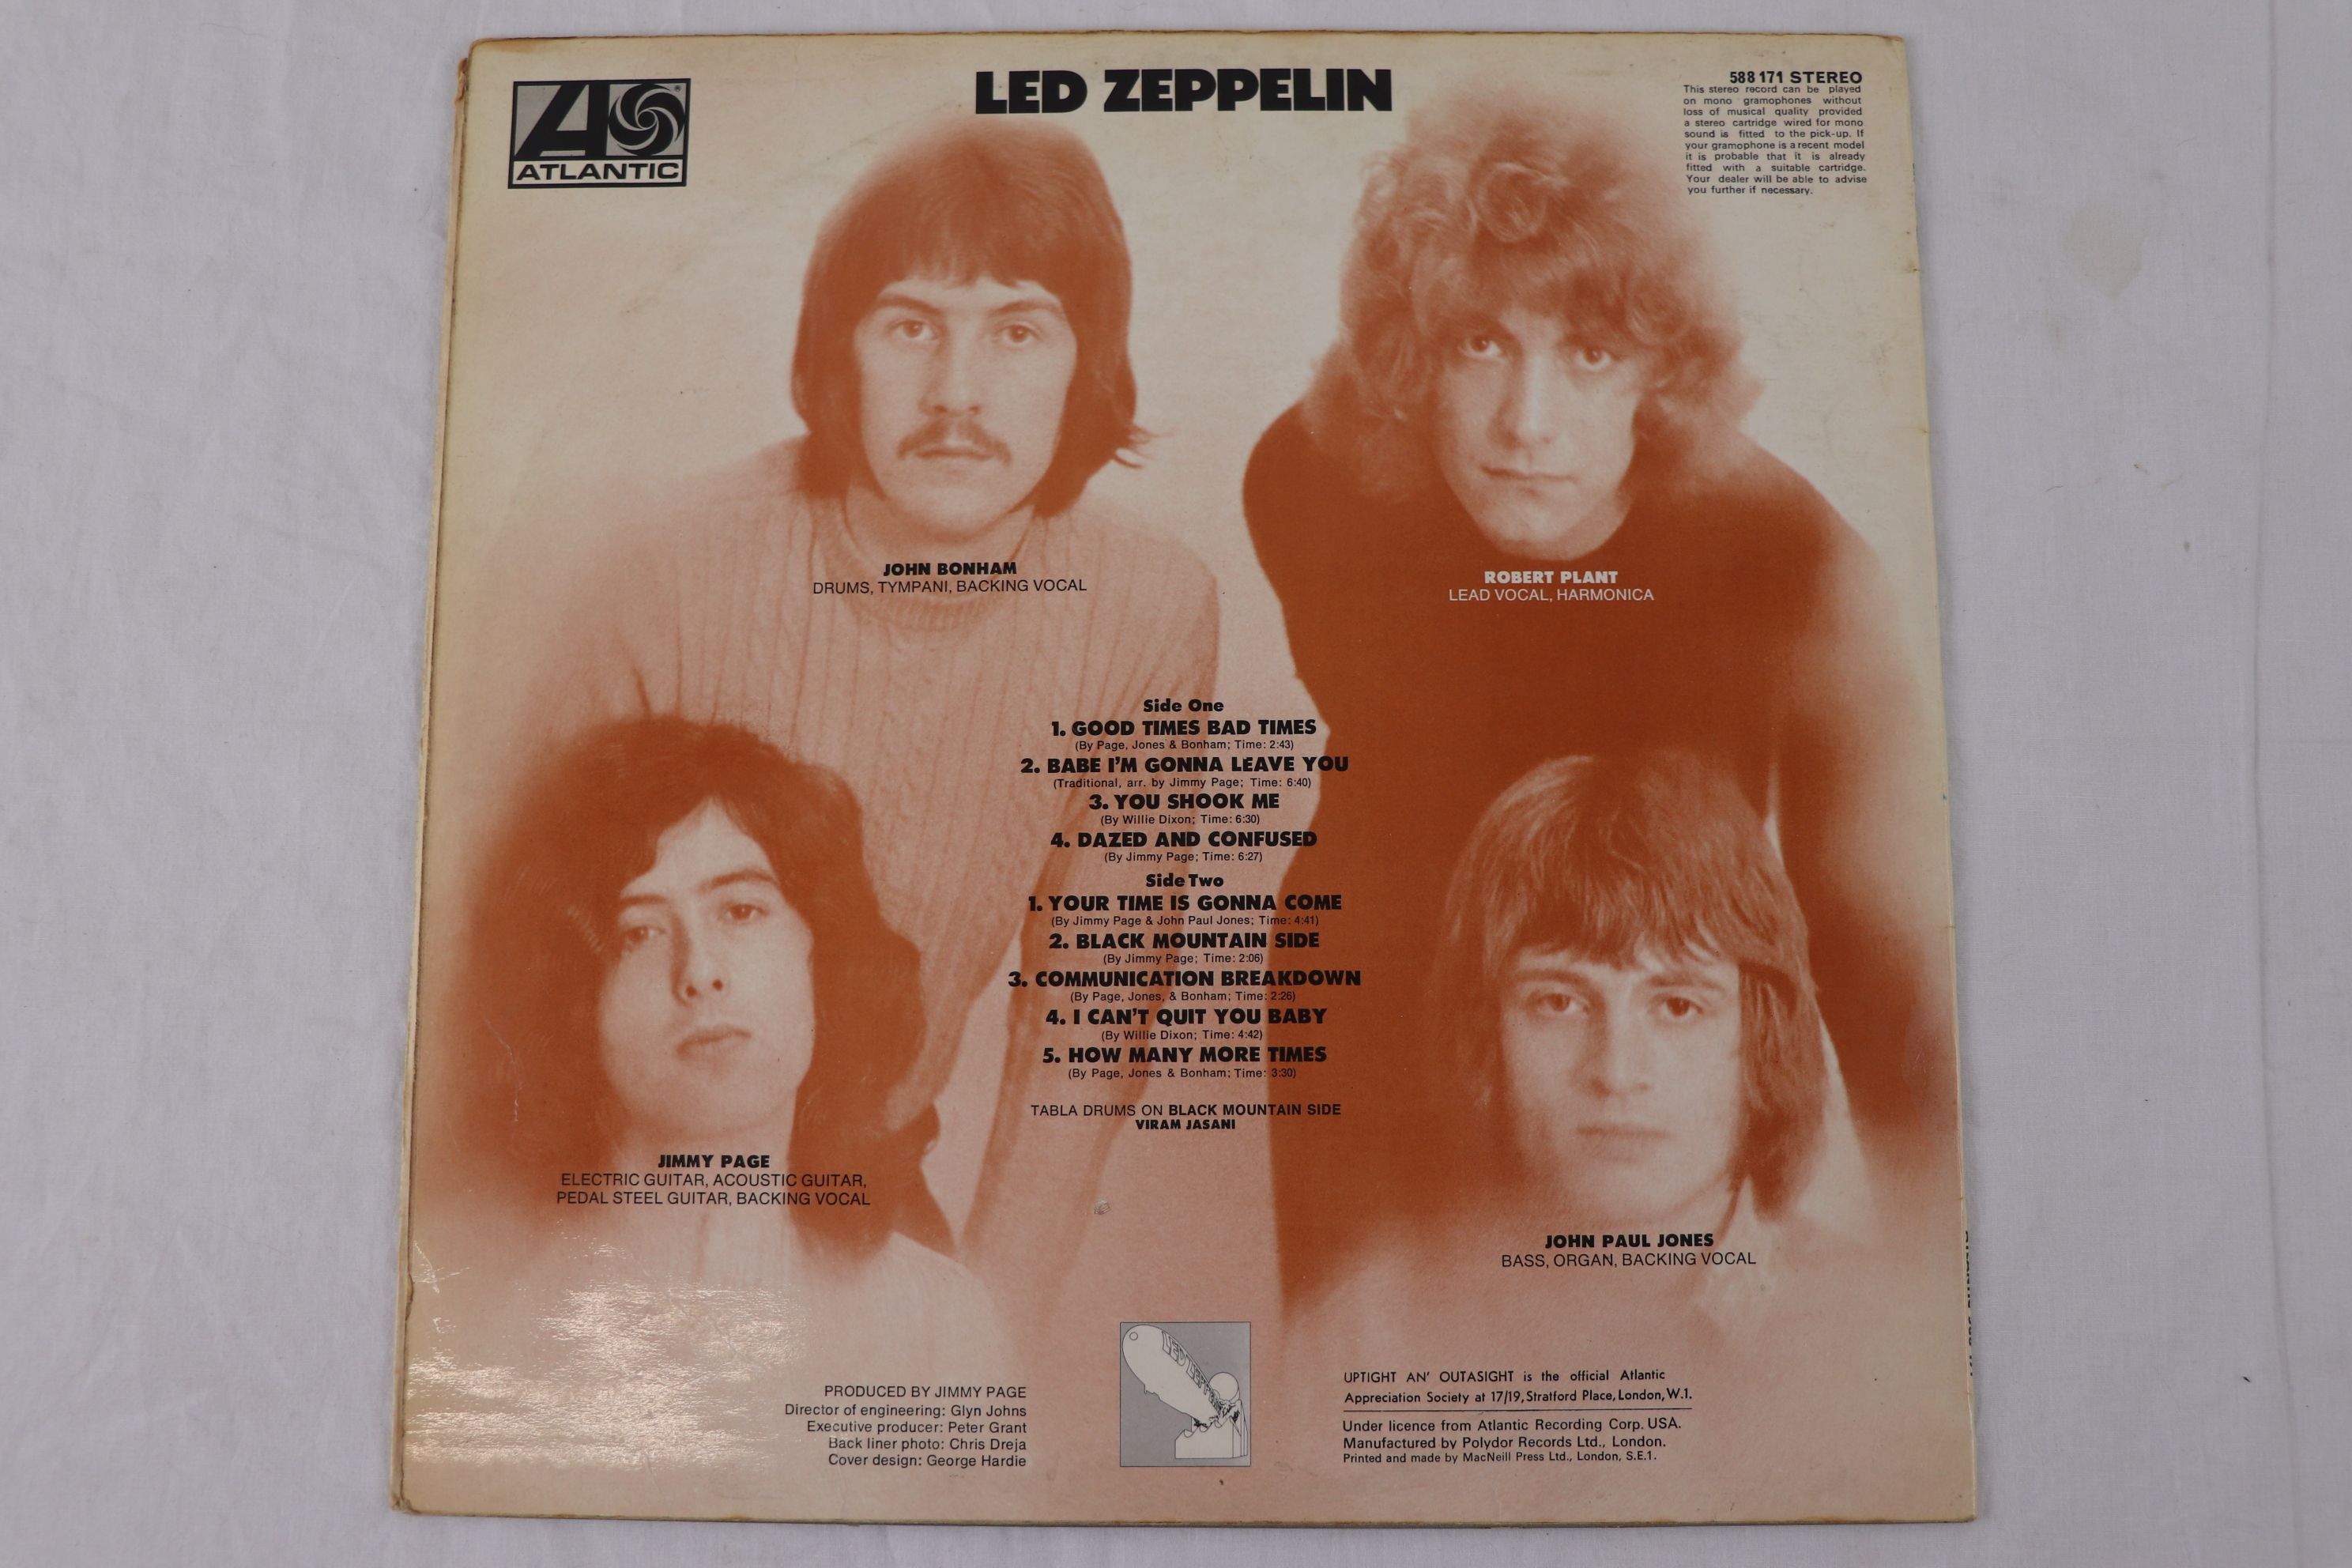 Vinyl - Led Zeppelin One (Atlantic 588171) stereo, with plum label, turquoise sleeve lettering - Image 10 of 12